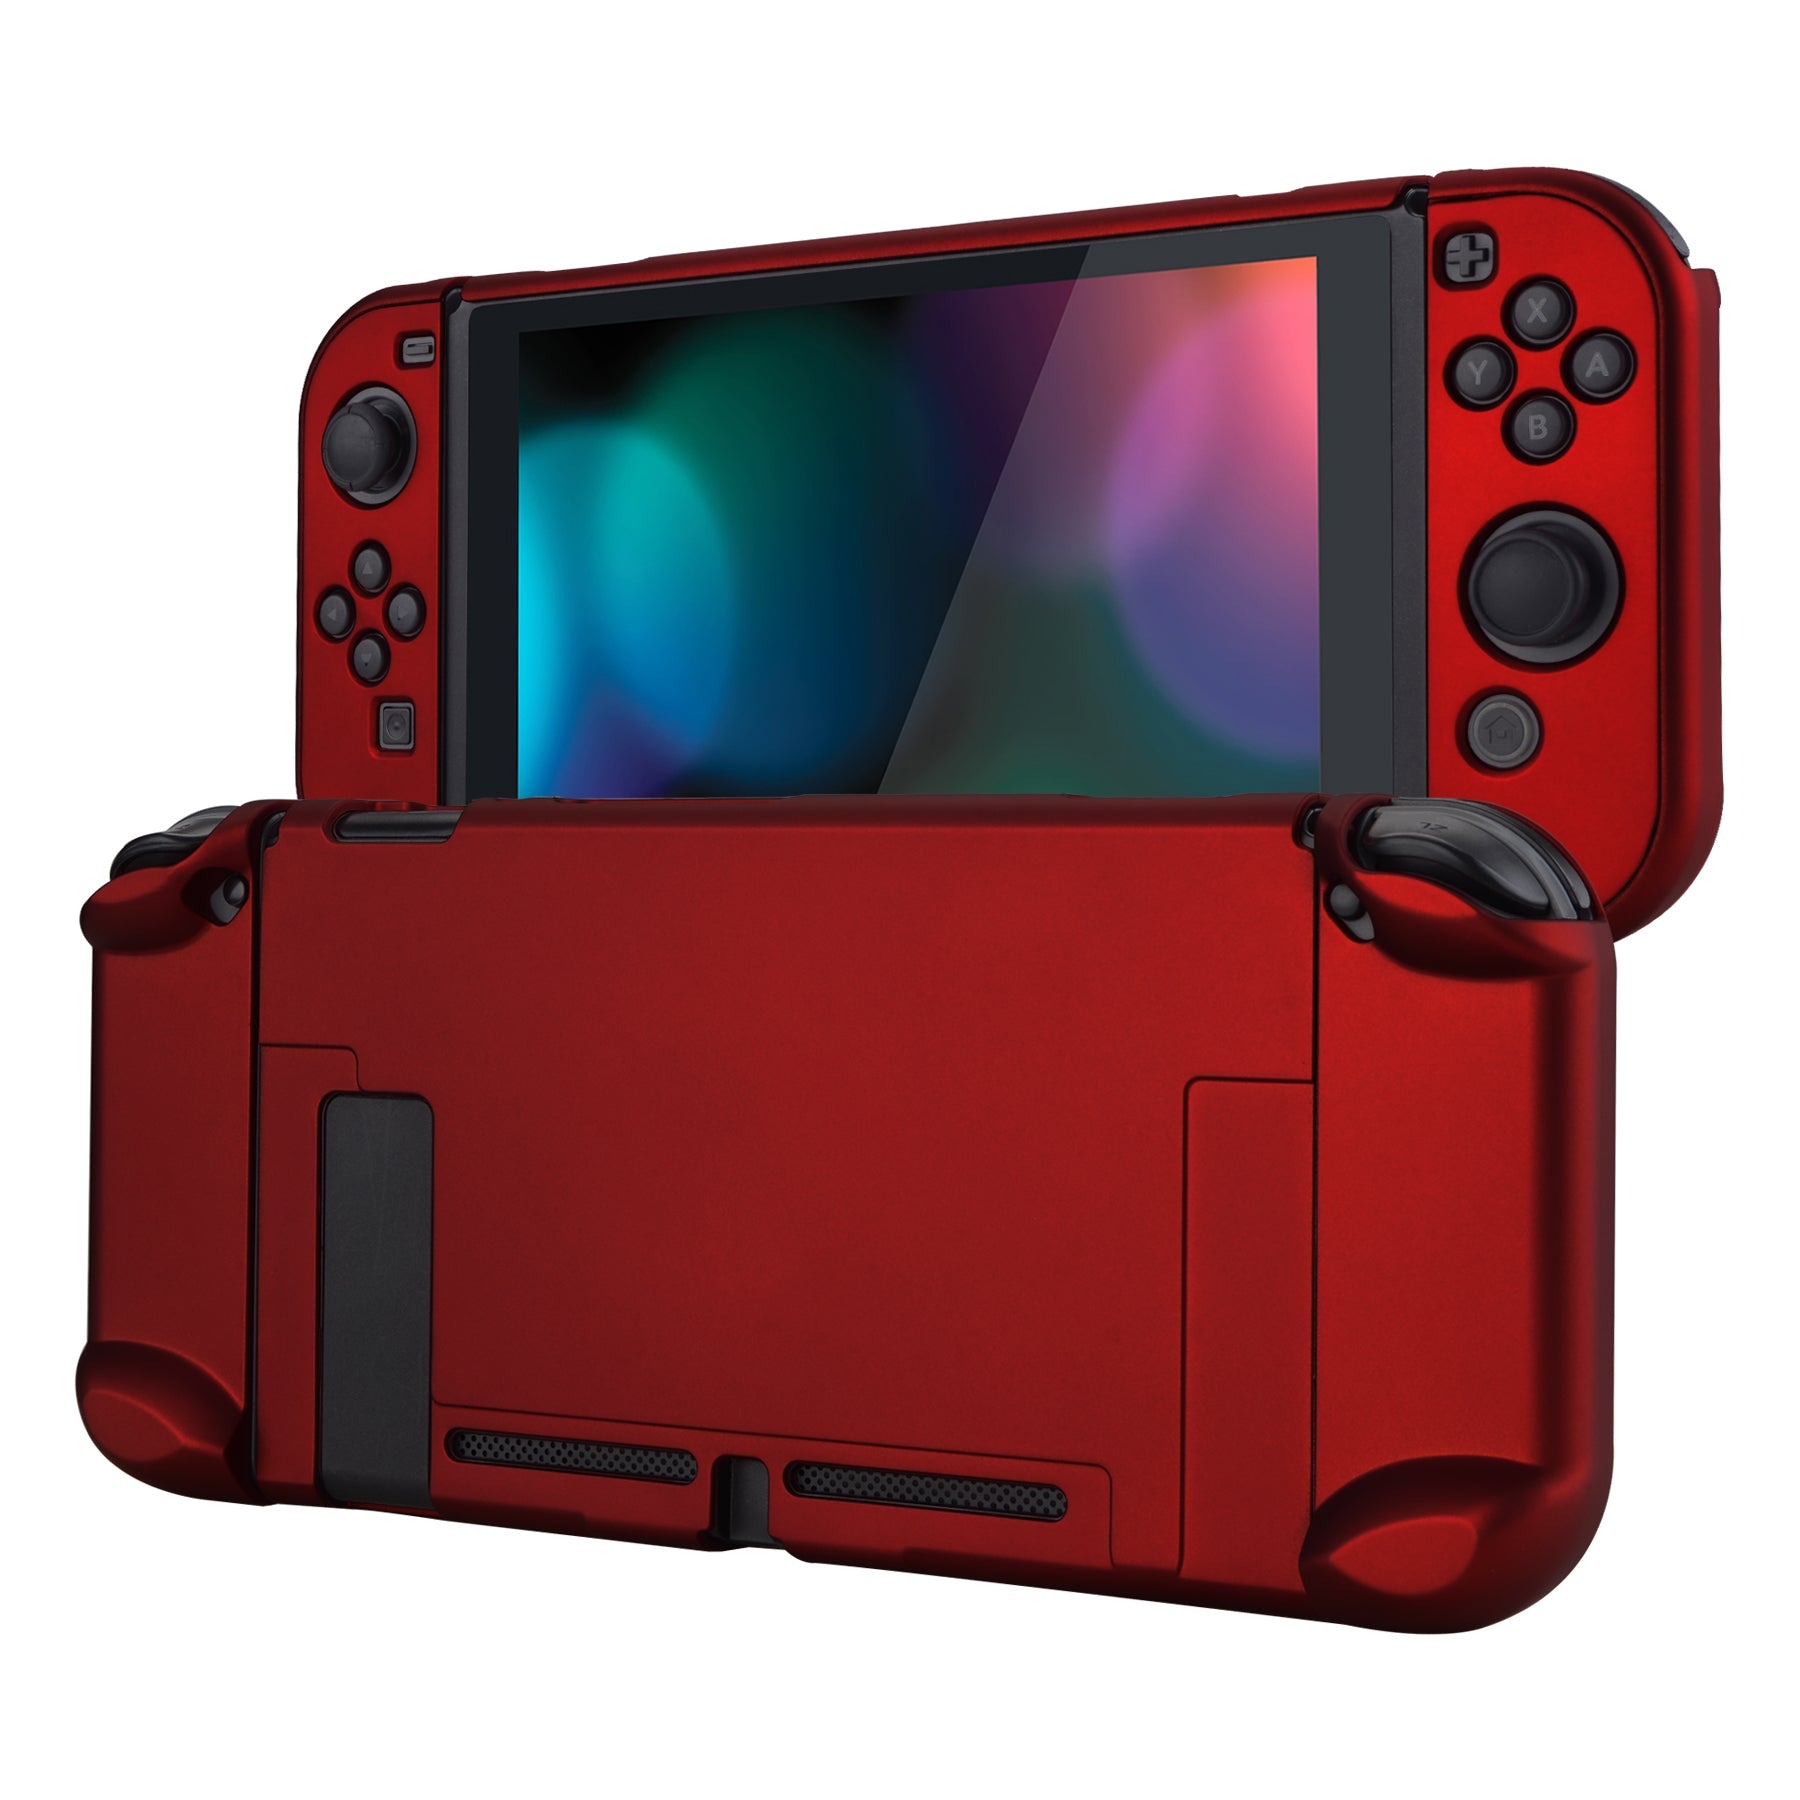 PlayVital Scarlet Red Back Cover for NS Switch Console, NS Joycon Handheld Controller Separable Protector Hard Shell, Customized Dockable Protective Case for NS Switch - NTP305 PlayVital